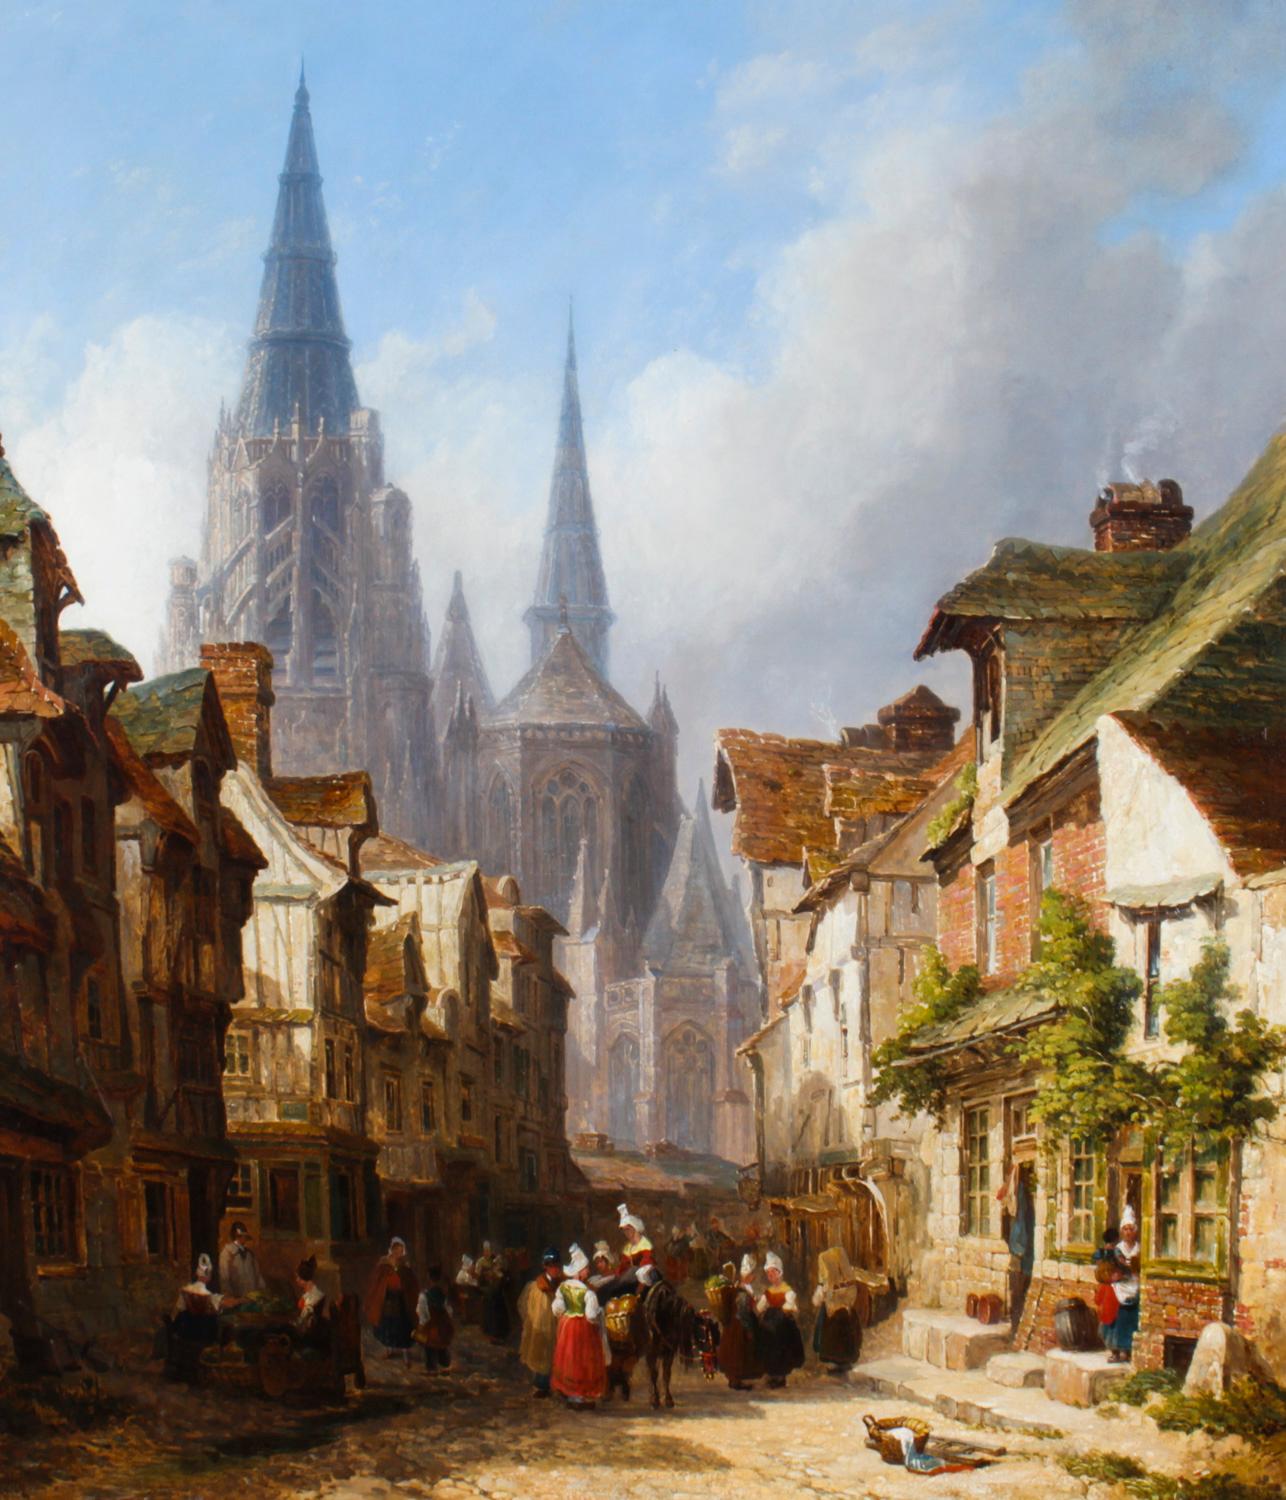 Caleb Robert Stanley (1795-1868) British. ‘Rouen’, with Figures in the Street, Oil on Canvas, Signed, 36” x 29” (91.5 x 73.7cm). Provenance: Burlington Paintings, London

A beautiful cityscape painting by Caleb Robert Stanley (British 1795-1868)